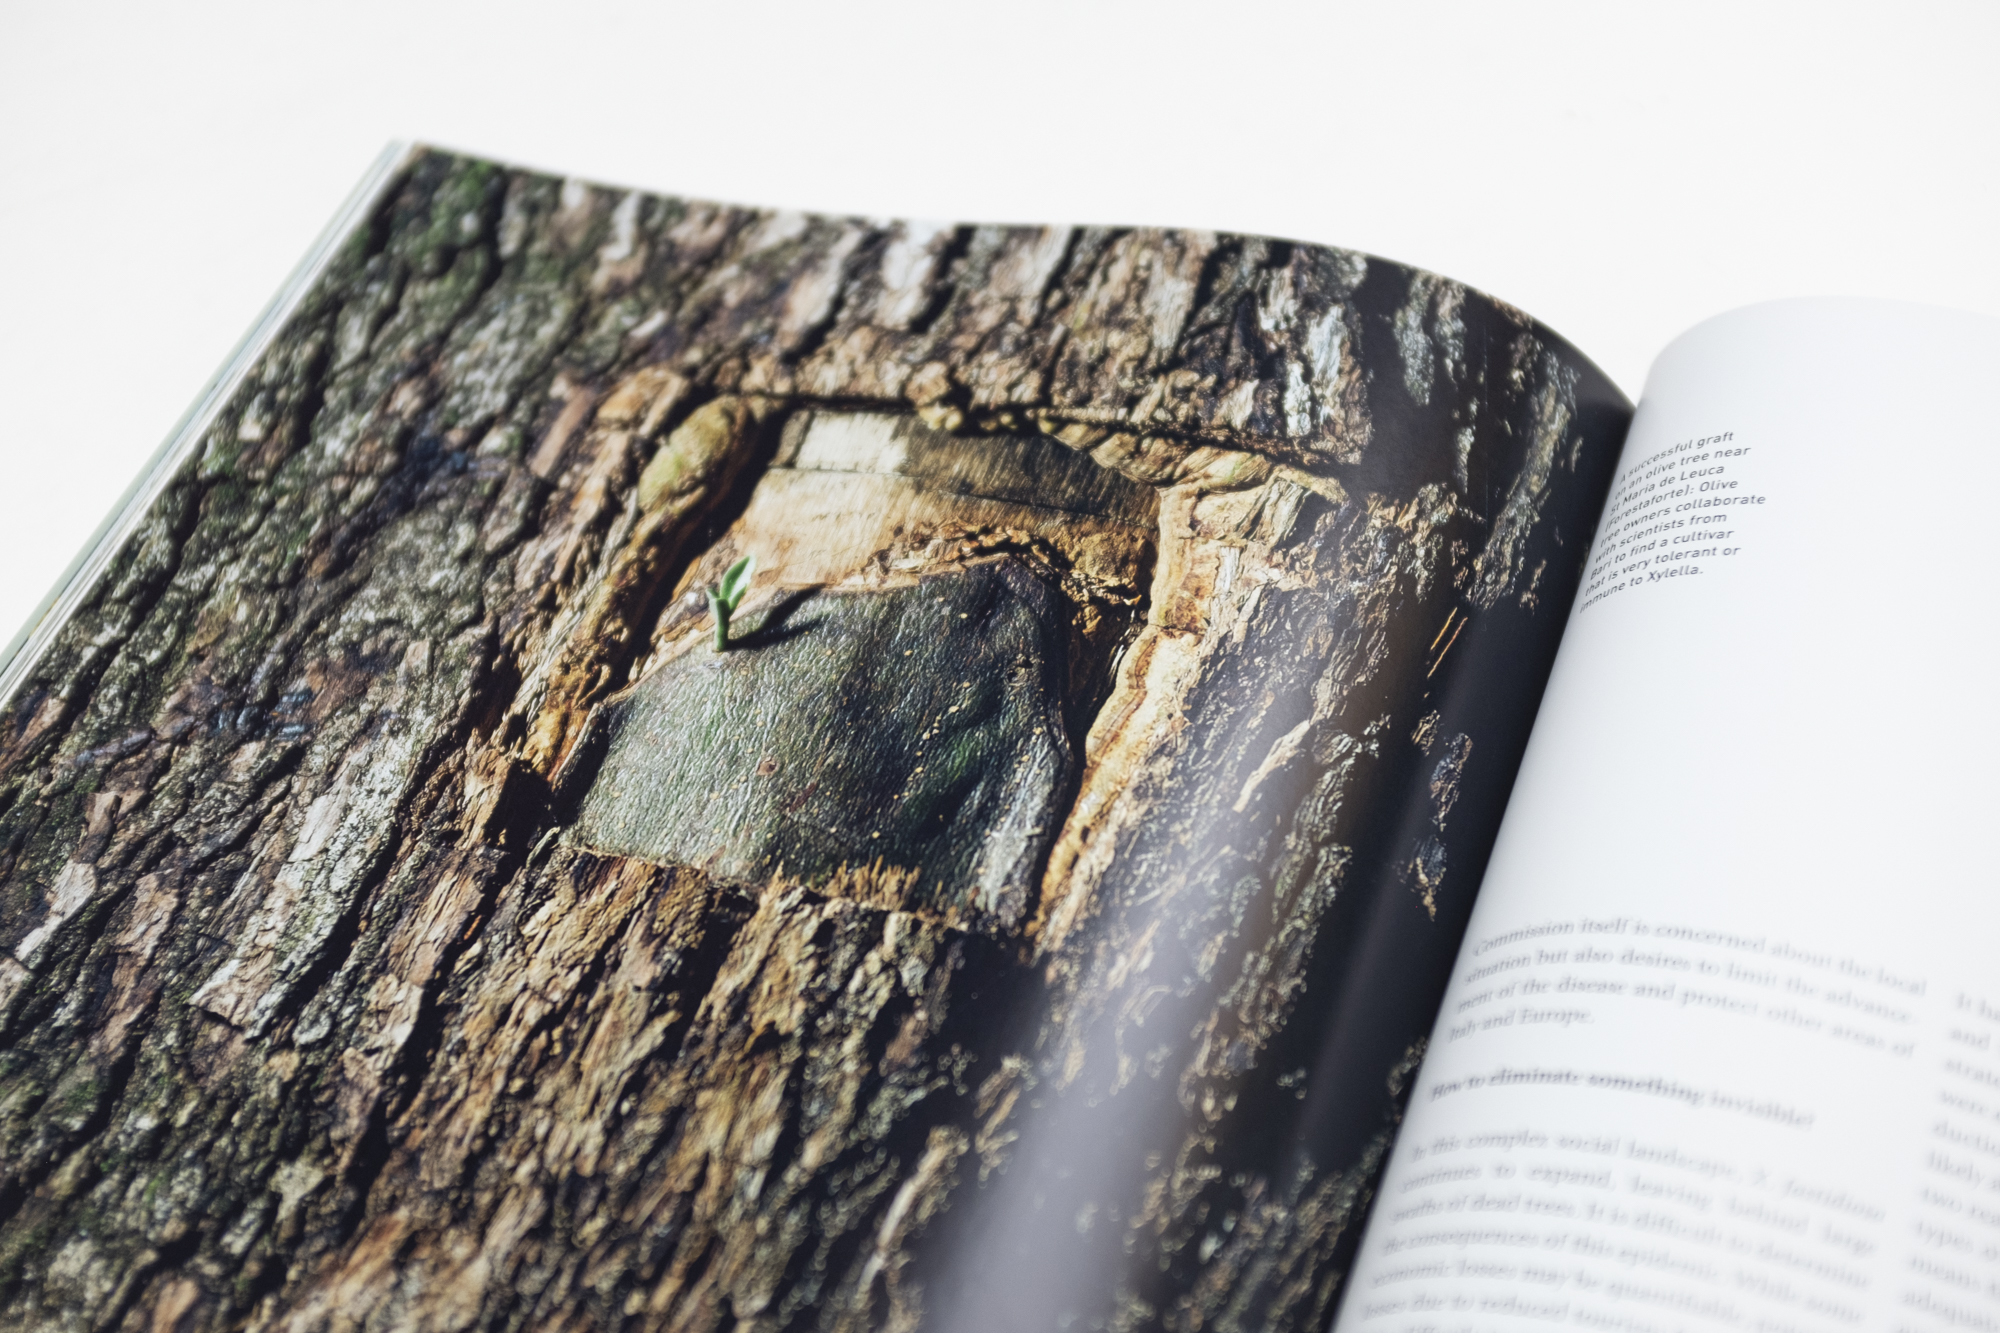 Publication "My father is in these trees" in TOPOS magazin no103 / 2018